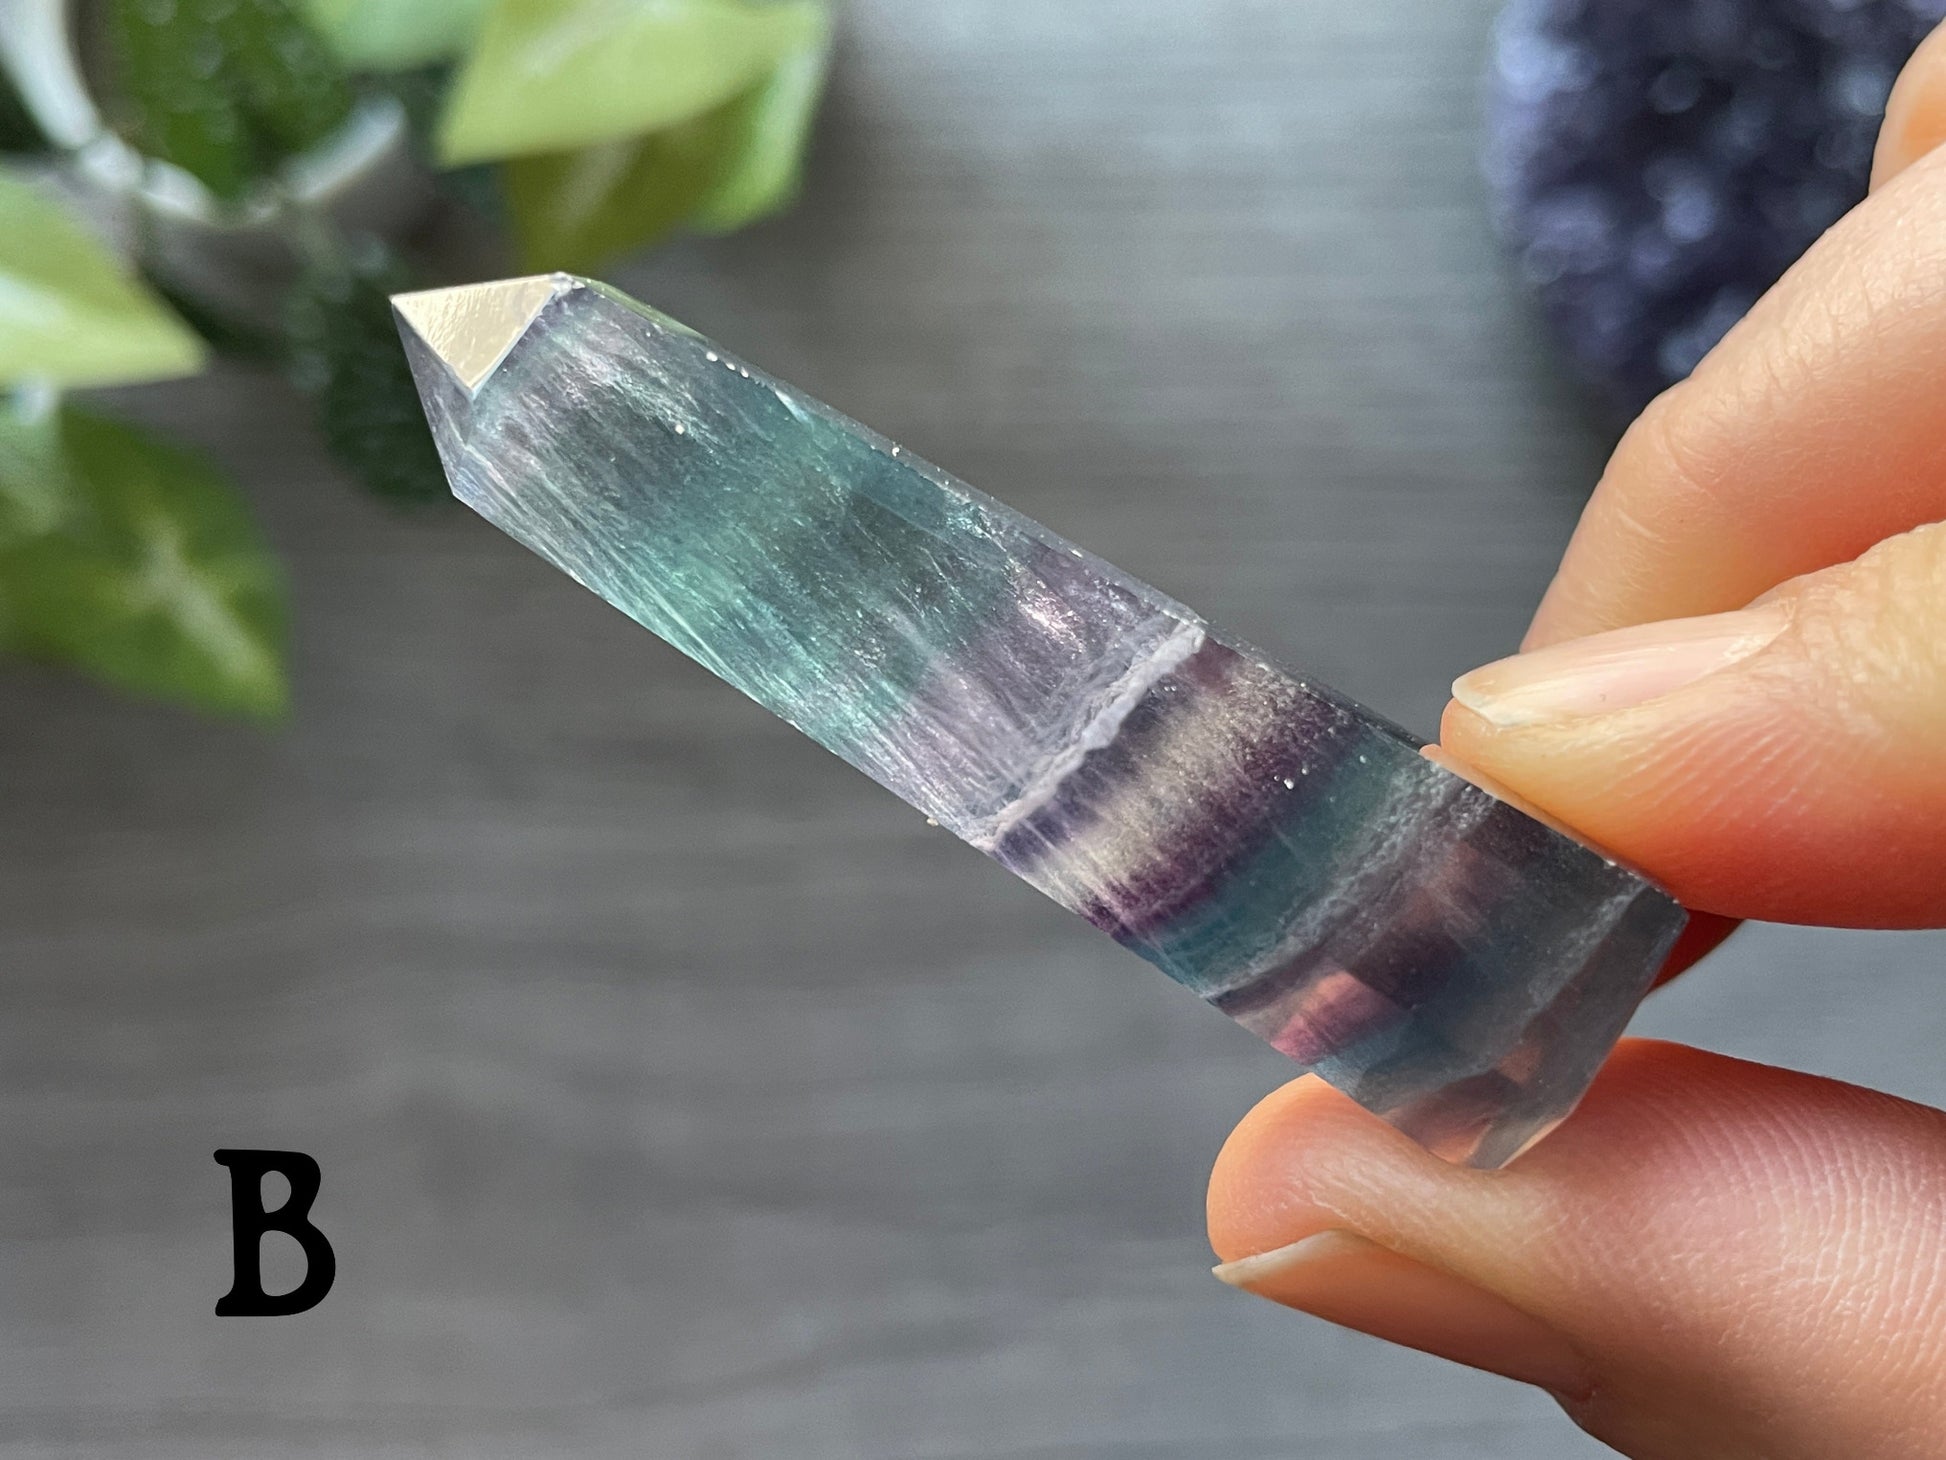 Pictured are various points of rainbow fluorite.